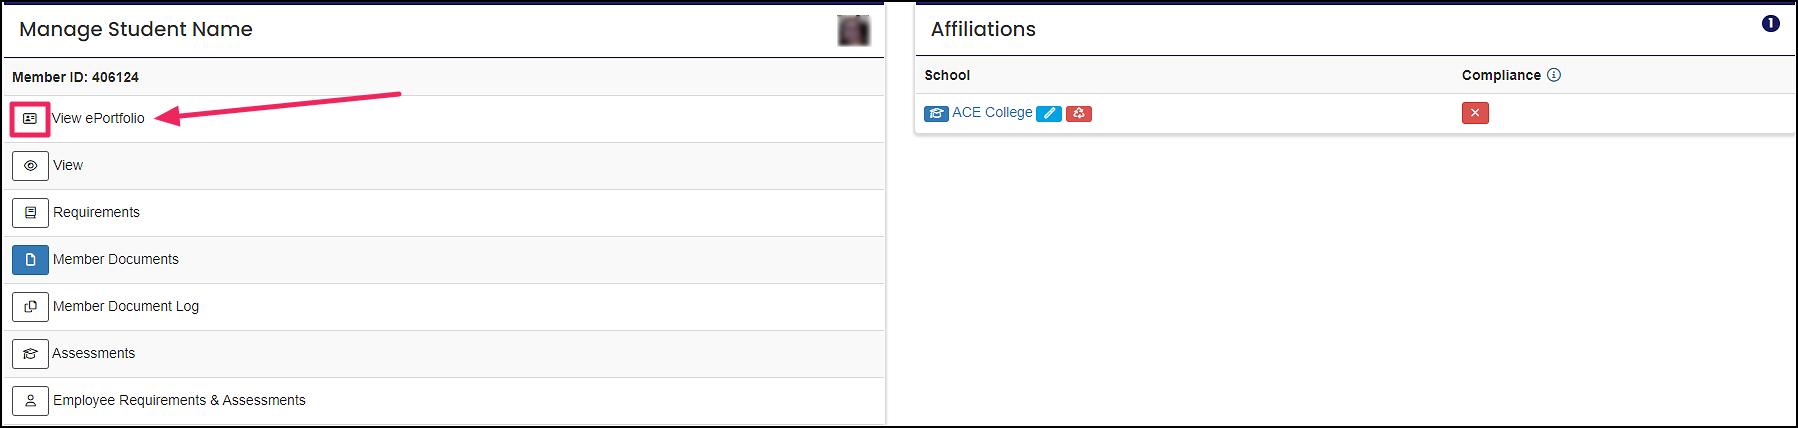 Manage individual member page highlighting View ePortfolio button